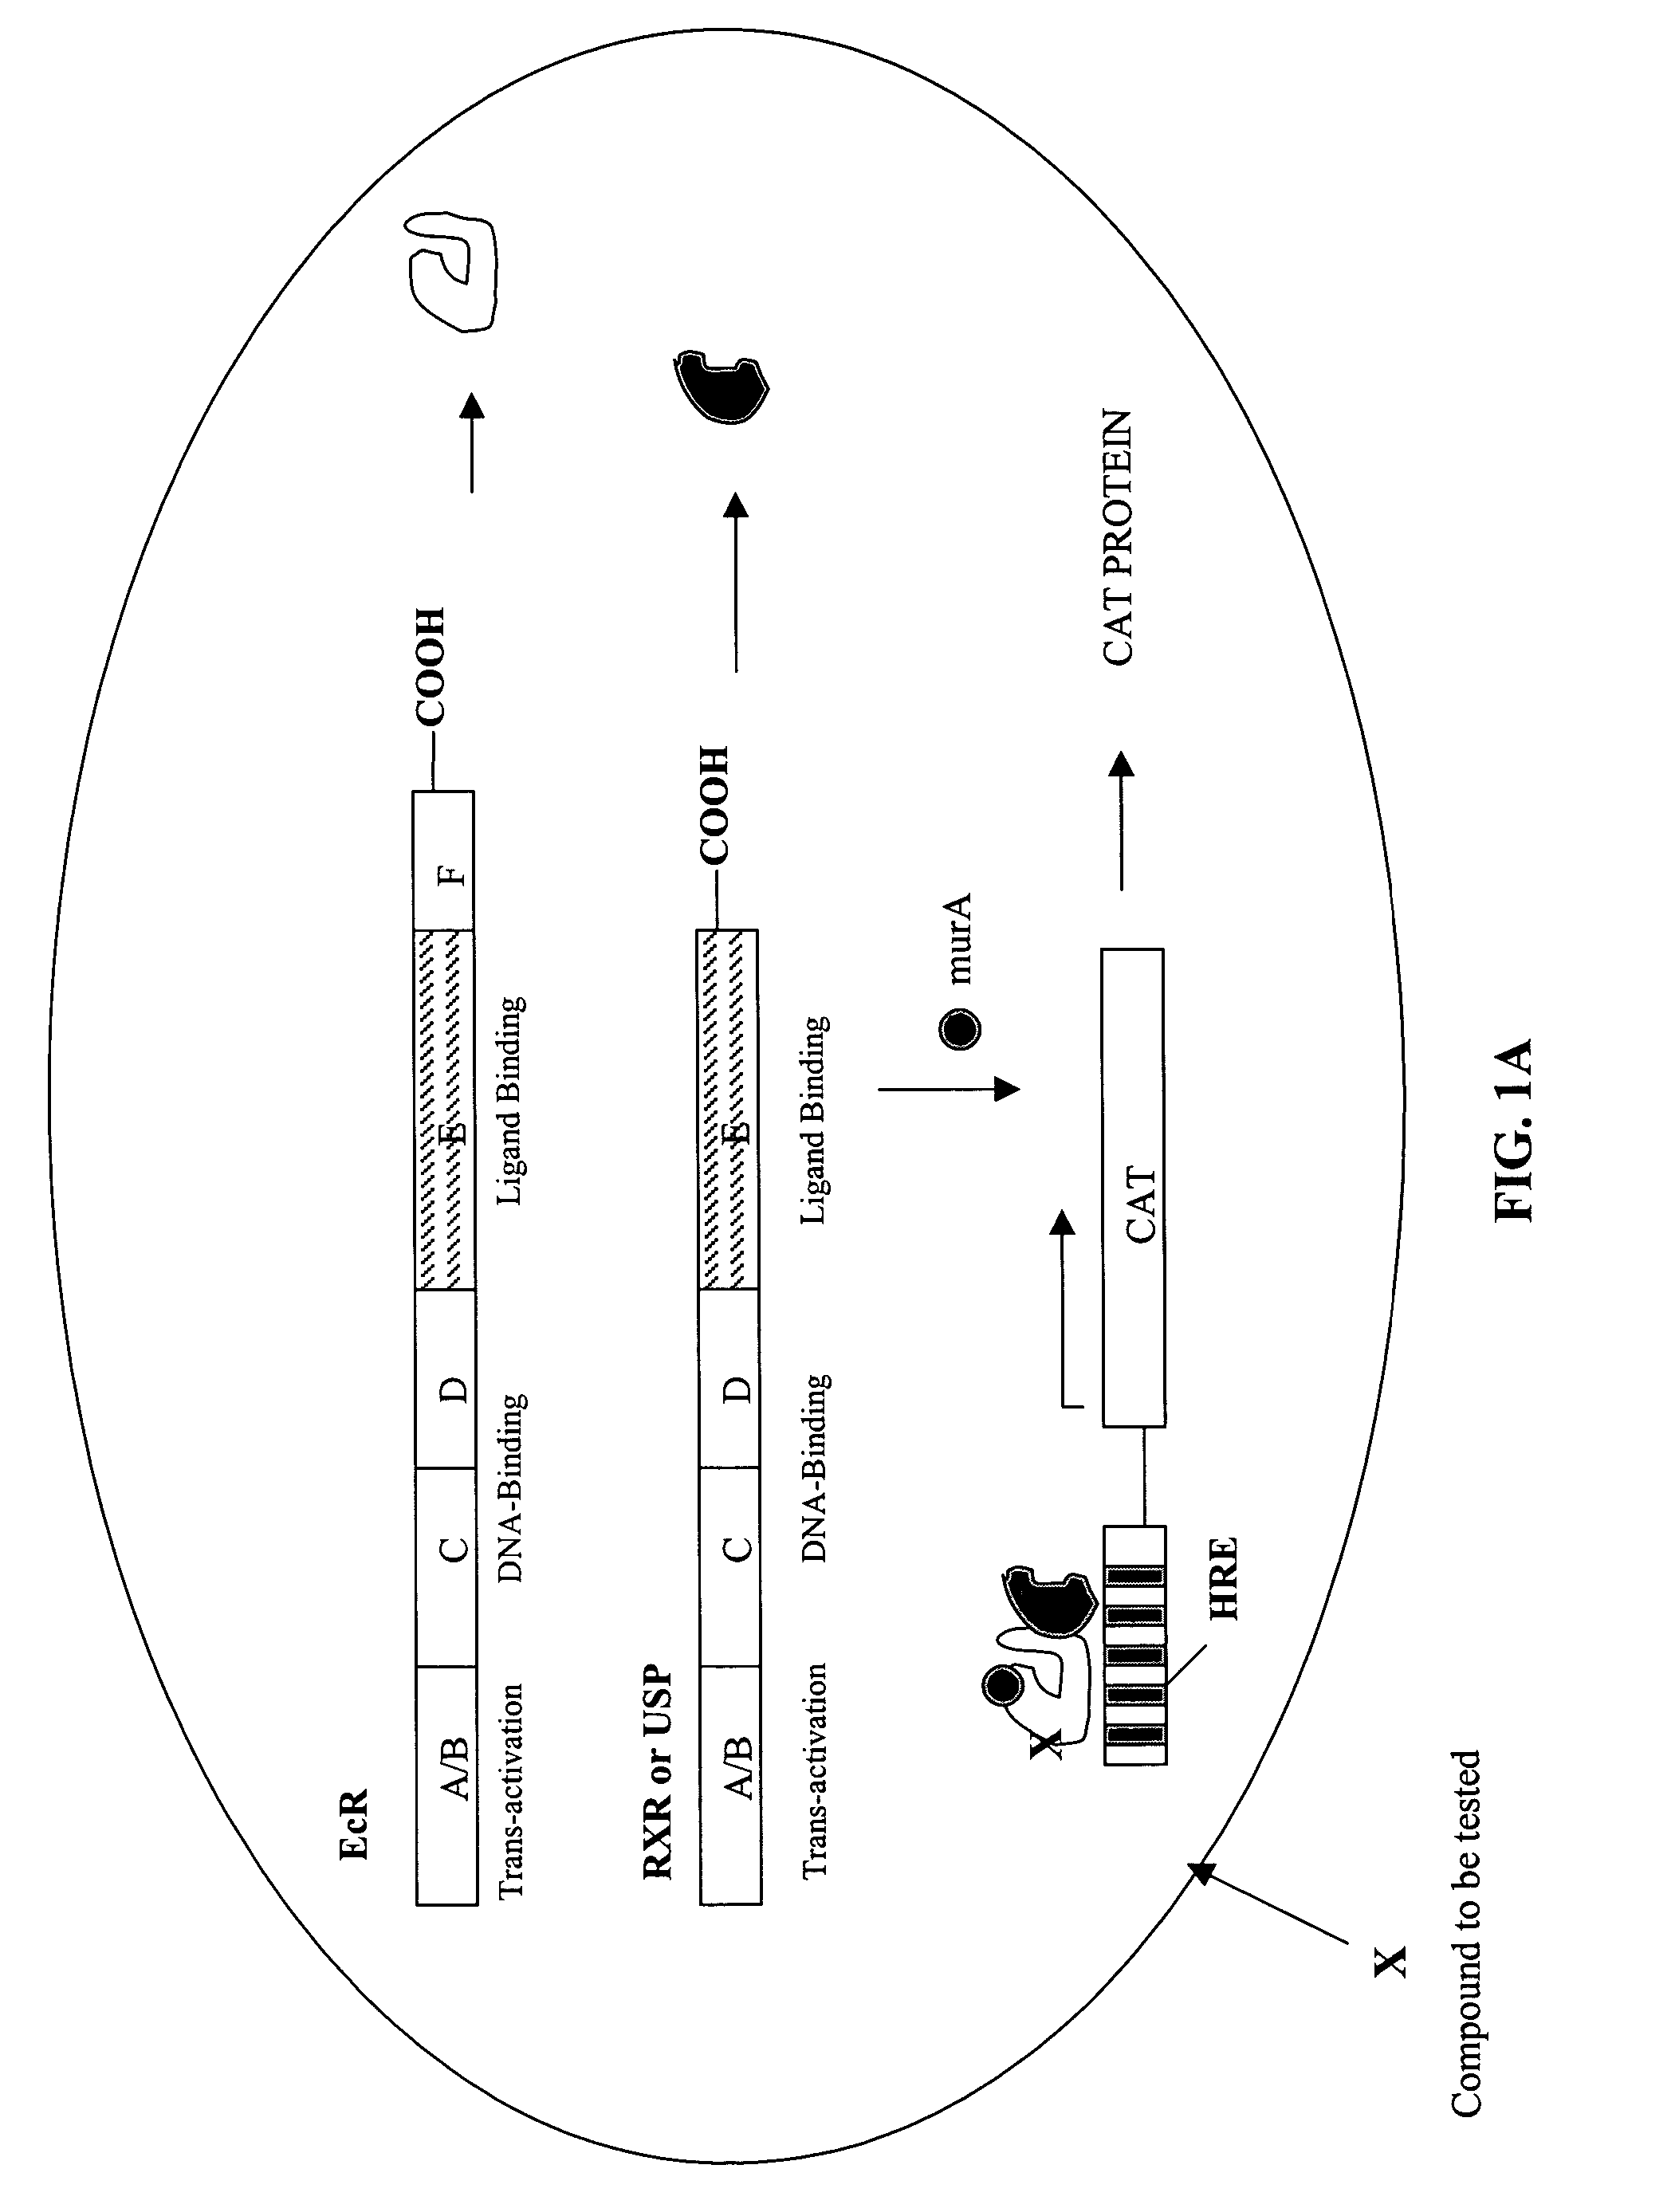 Compounds that act to modulate insect growth and methods and systems for identifying such compounds